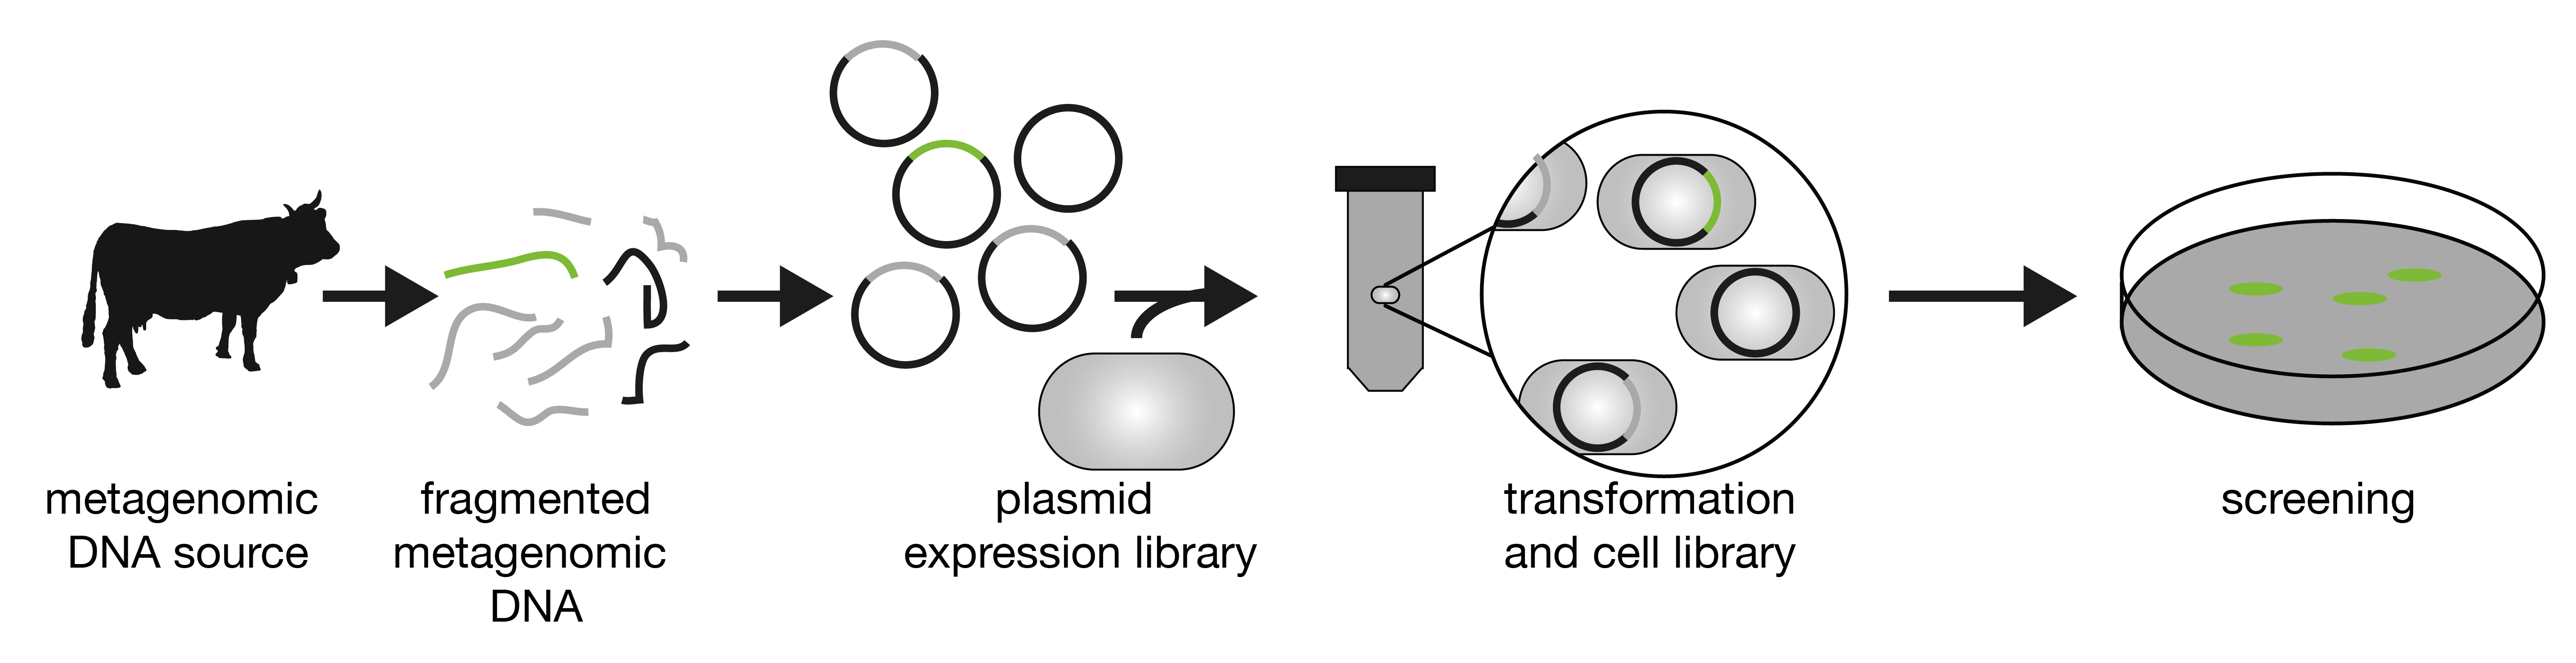 Construction of a metagenomic library